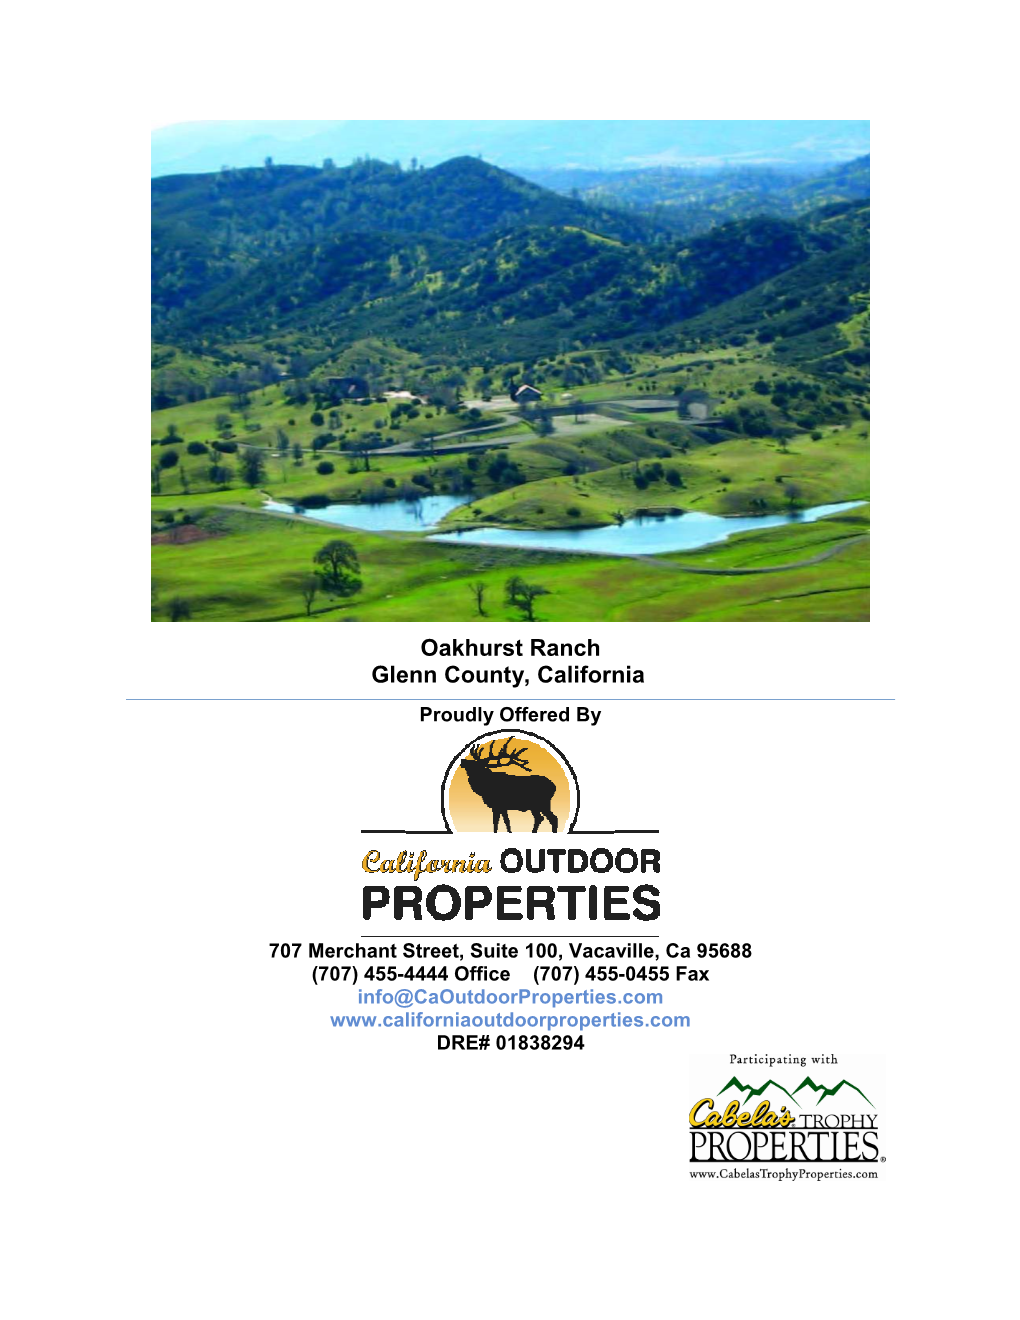 Oakhurst Ranch Glenn County, California Proudly Offered By